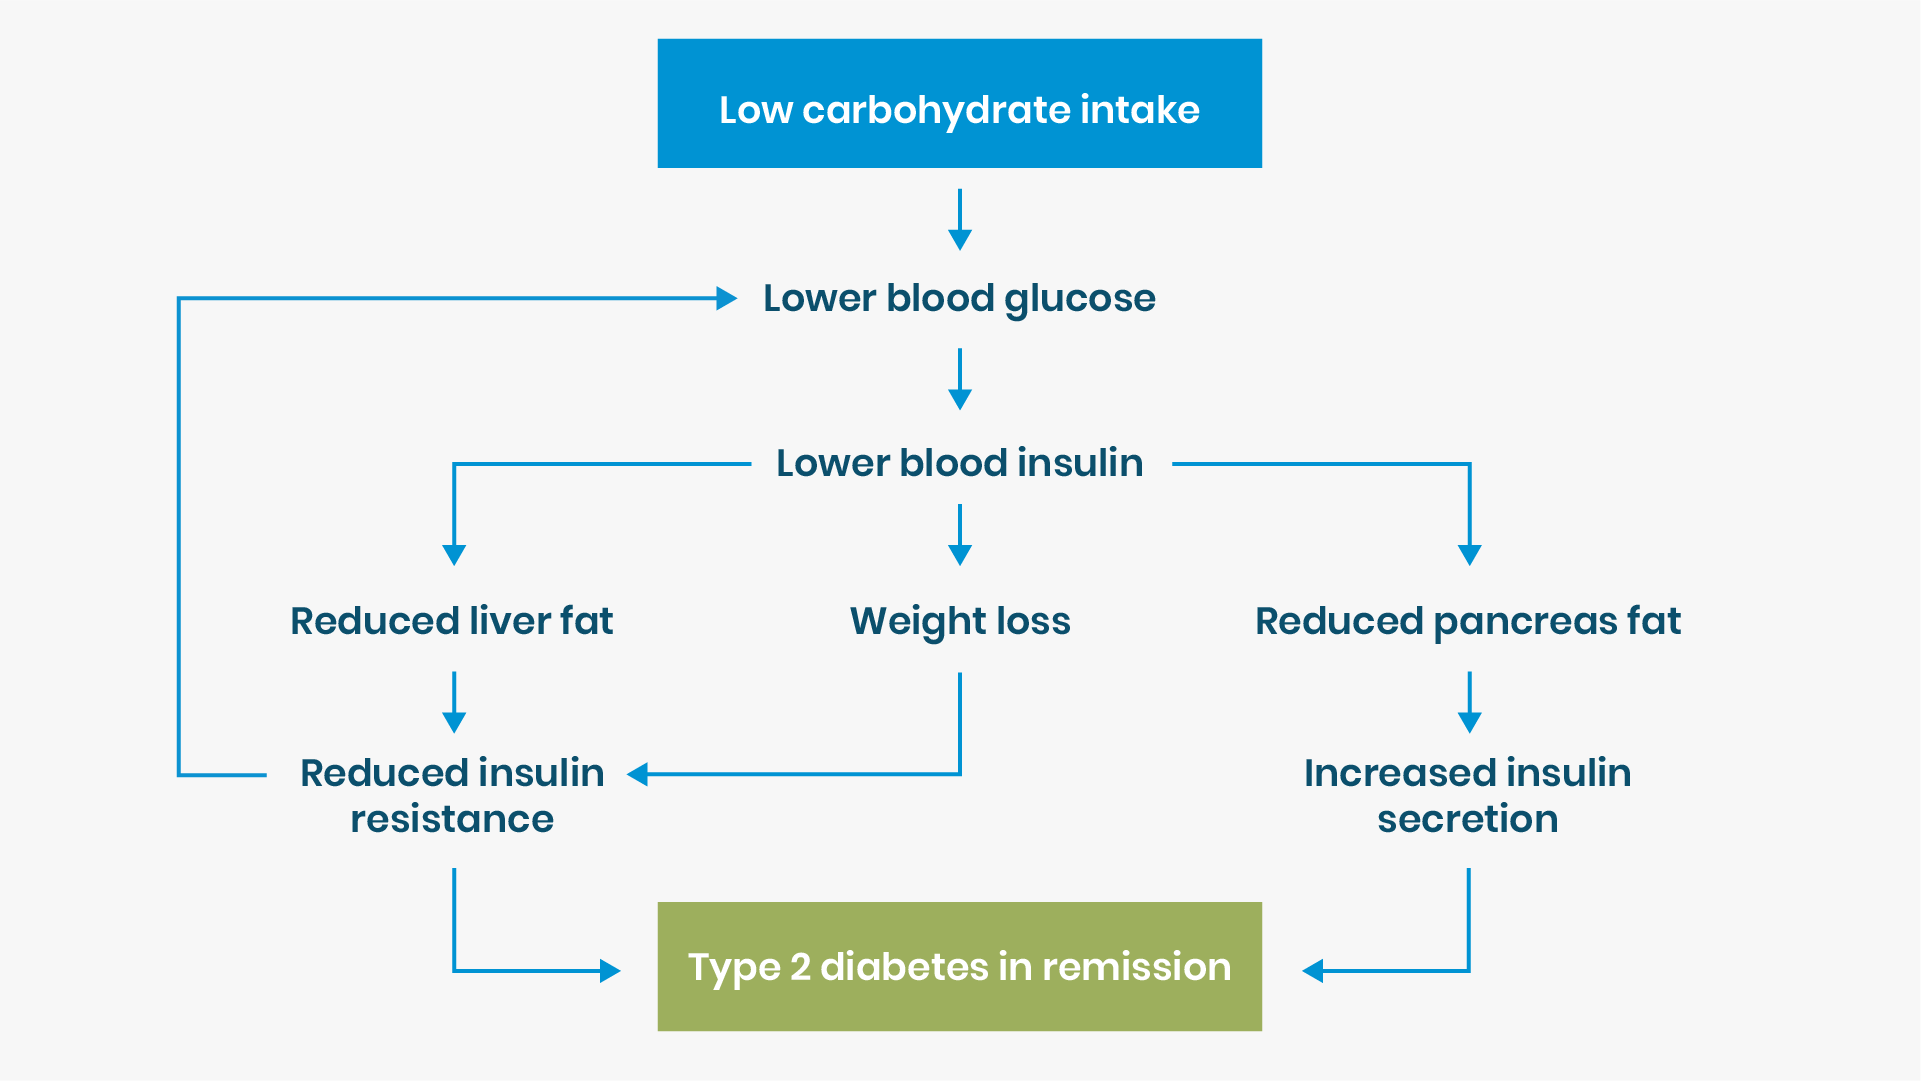 Type 2 diabetes in remission